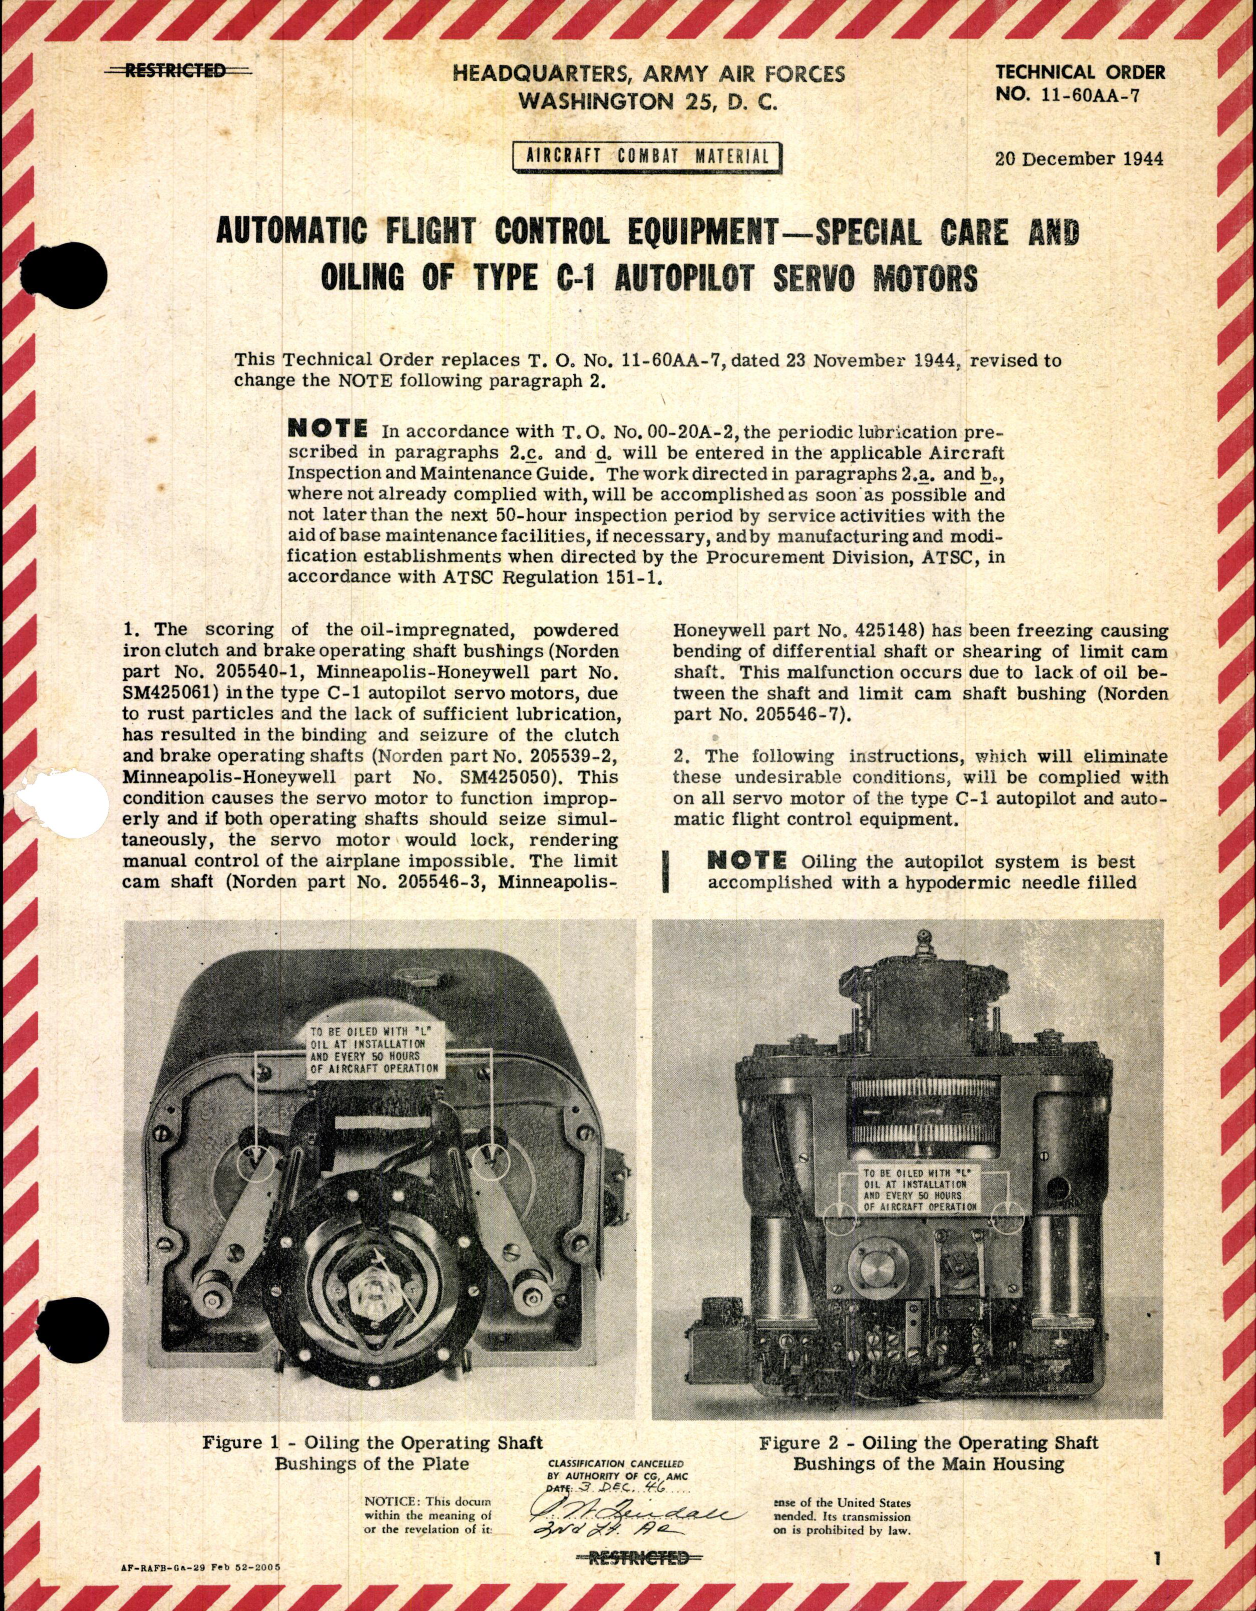 Sample page 1 from AirCorps Library document: Special Care and Oiling of Type C-1 Autopilot Servo Motors